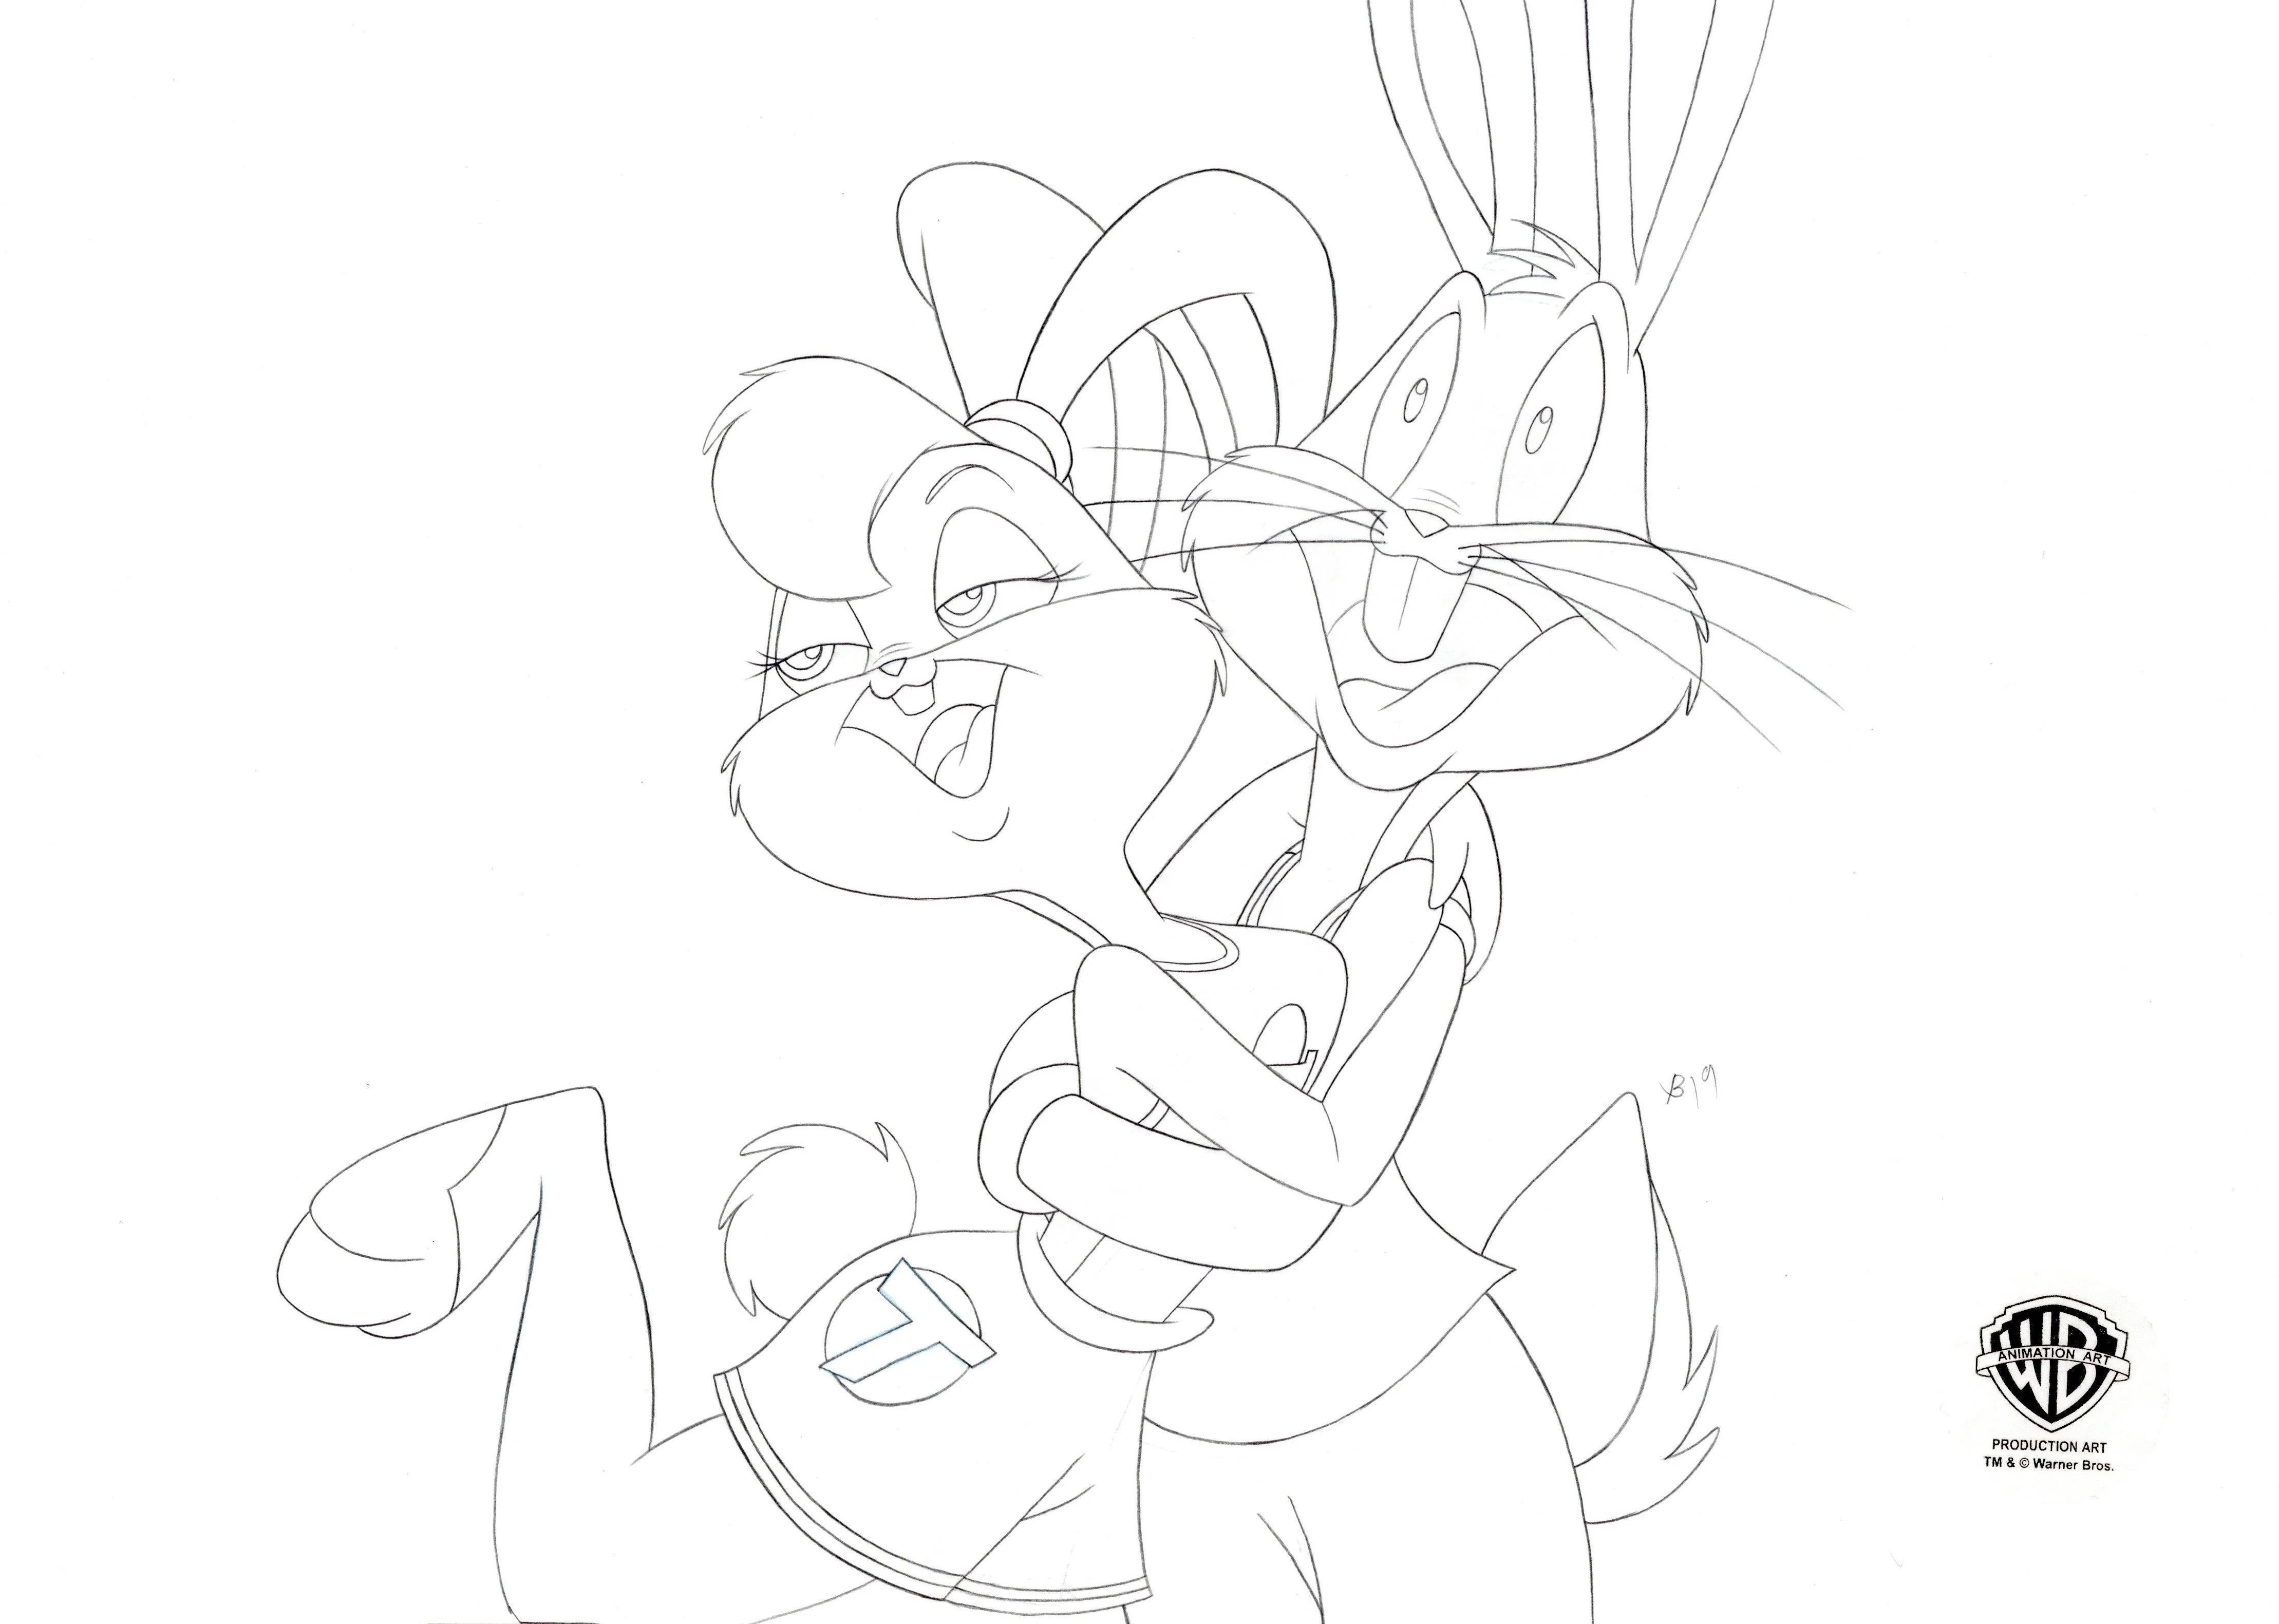 Space Jam Original Production Drawing: Lola Bunny and Bugs Bunny - Art by Looney Tunes Studio Artists